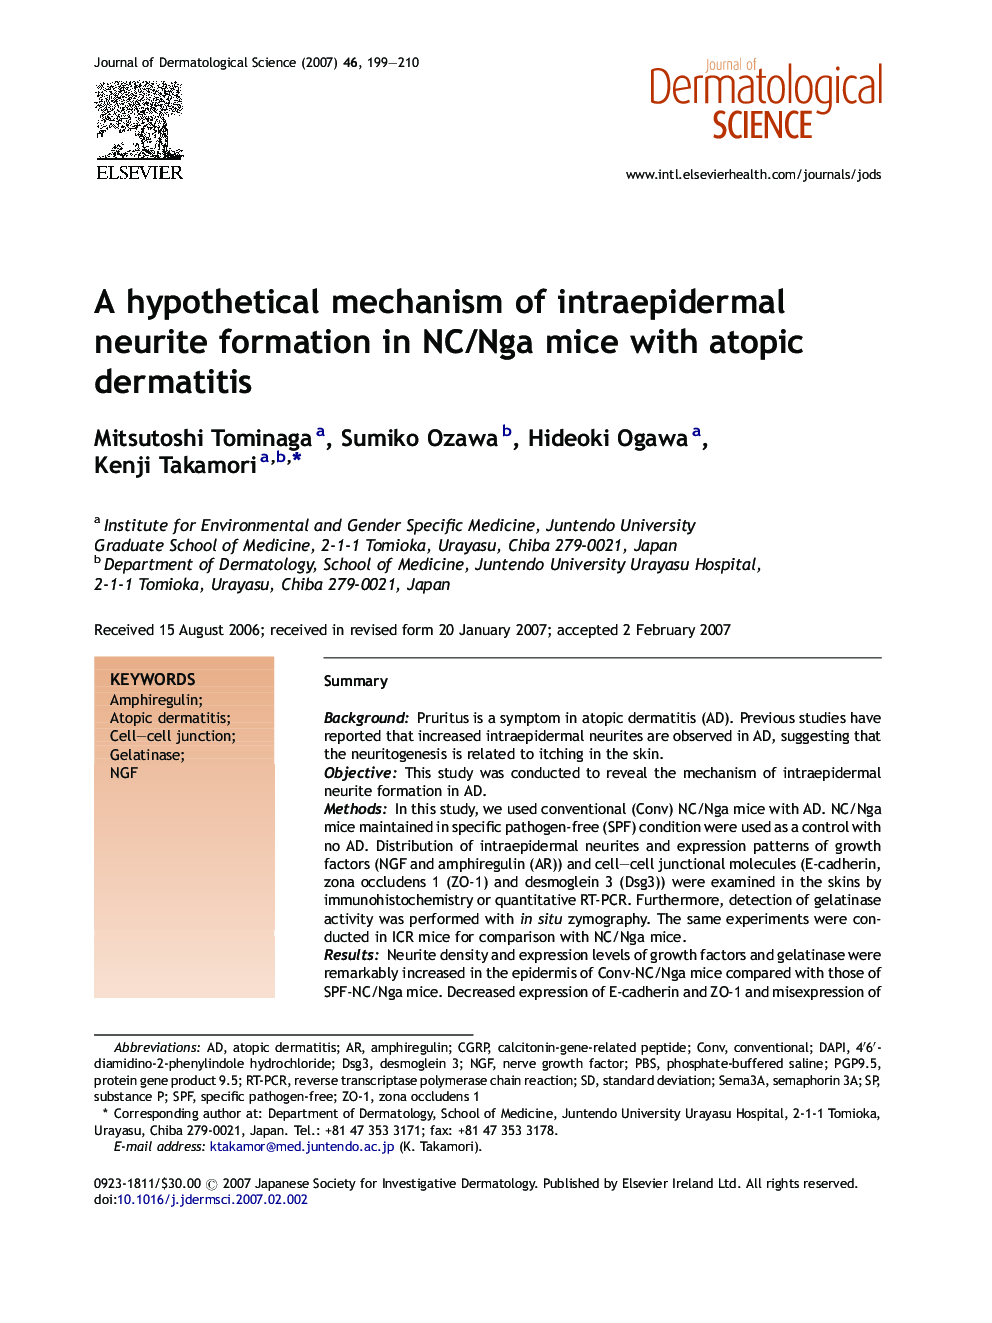 A hypothetical mechanism of intraepidermal neurite formation in NC/Nga mice with atopic dermatitis